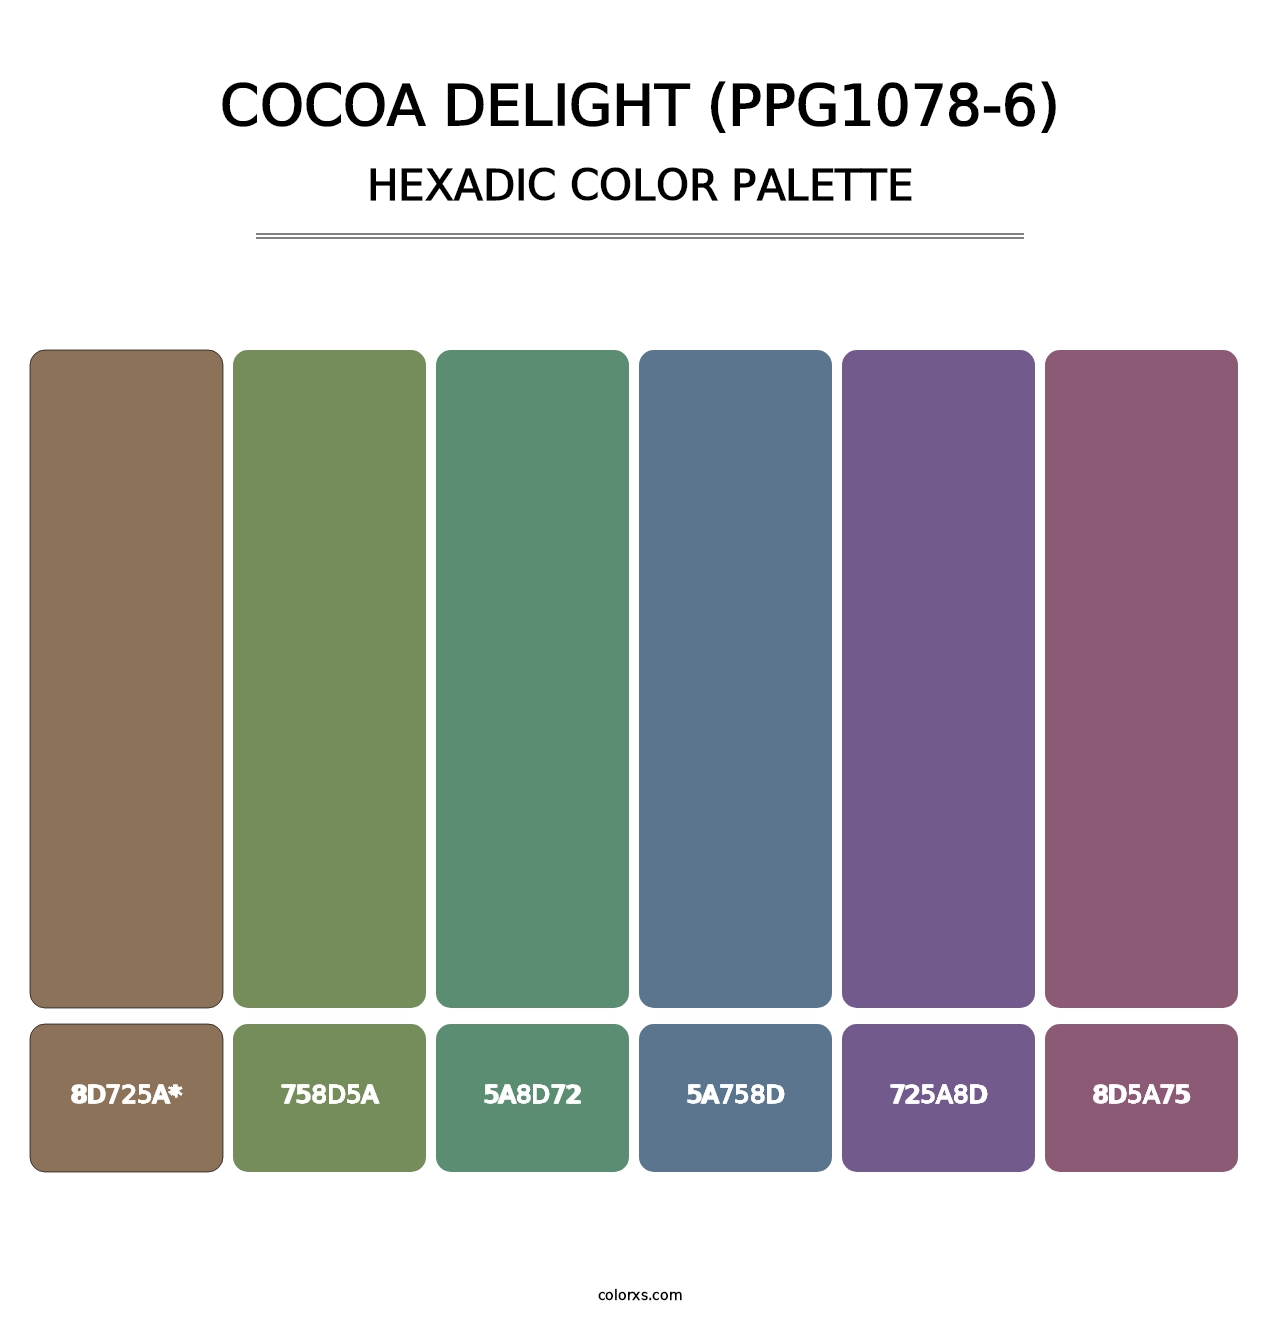 Cocoa Delight (PPG1078-6) - Hexadic Color Palette